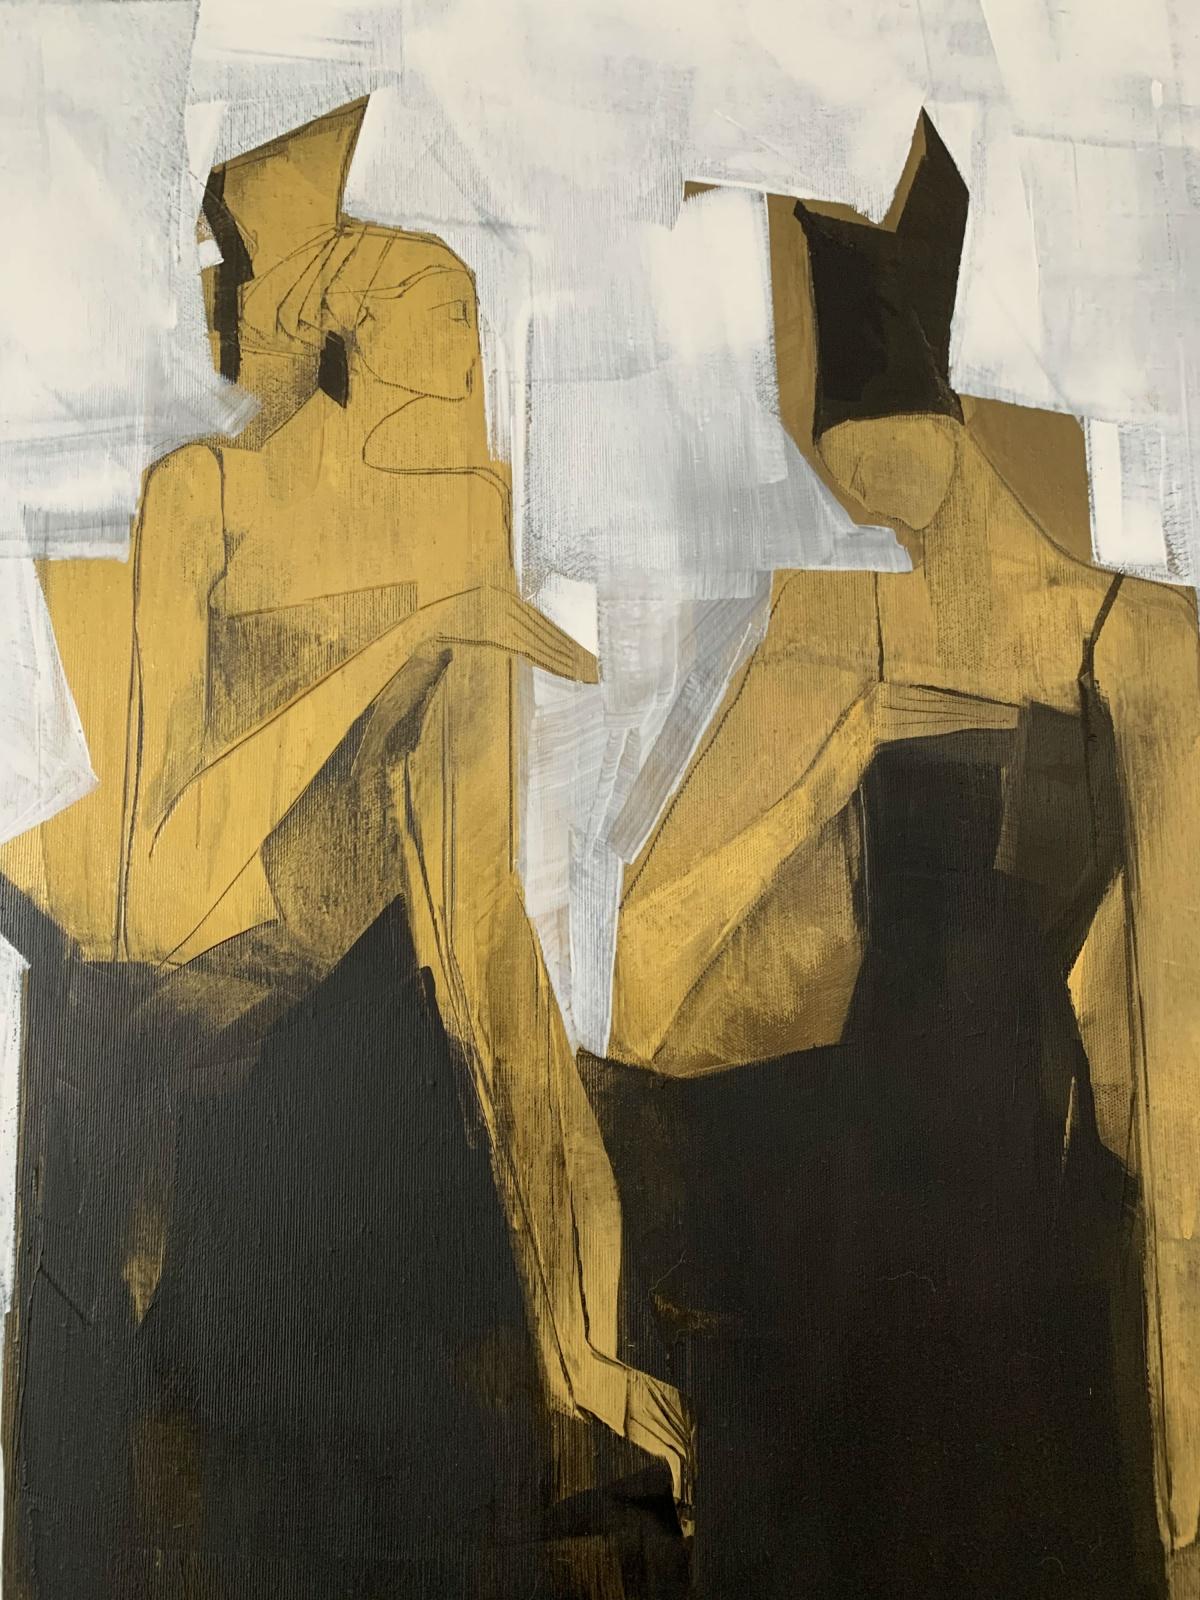 Muses - Contemporary Oil Painting, Black gold & white, Figurative, Big format 2